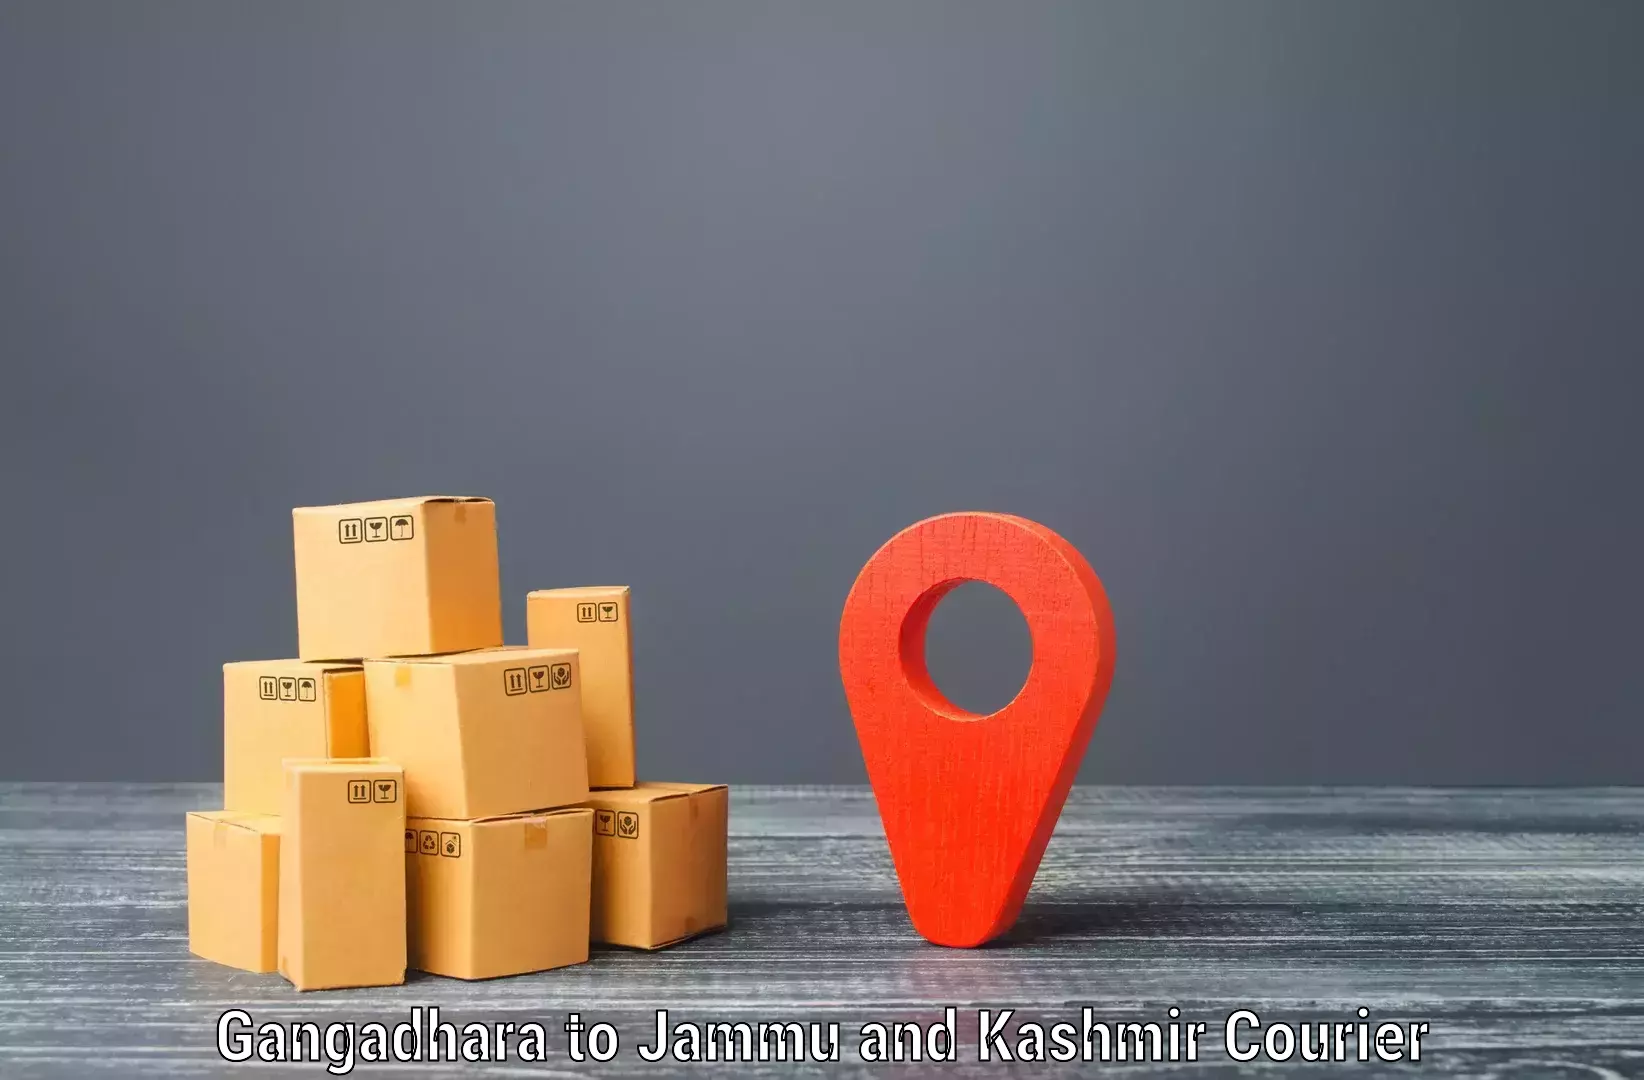 Subscription-based courier Gangadhara to Chenani